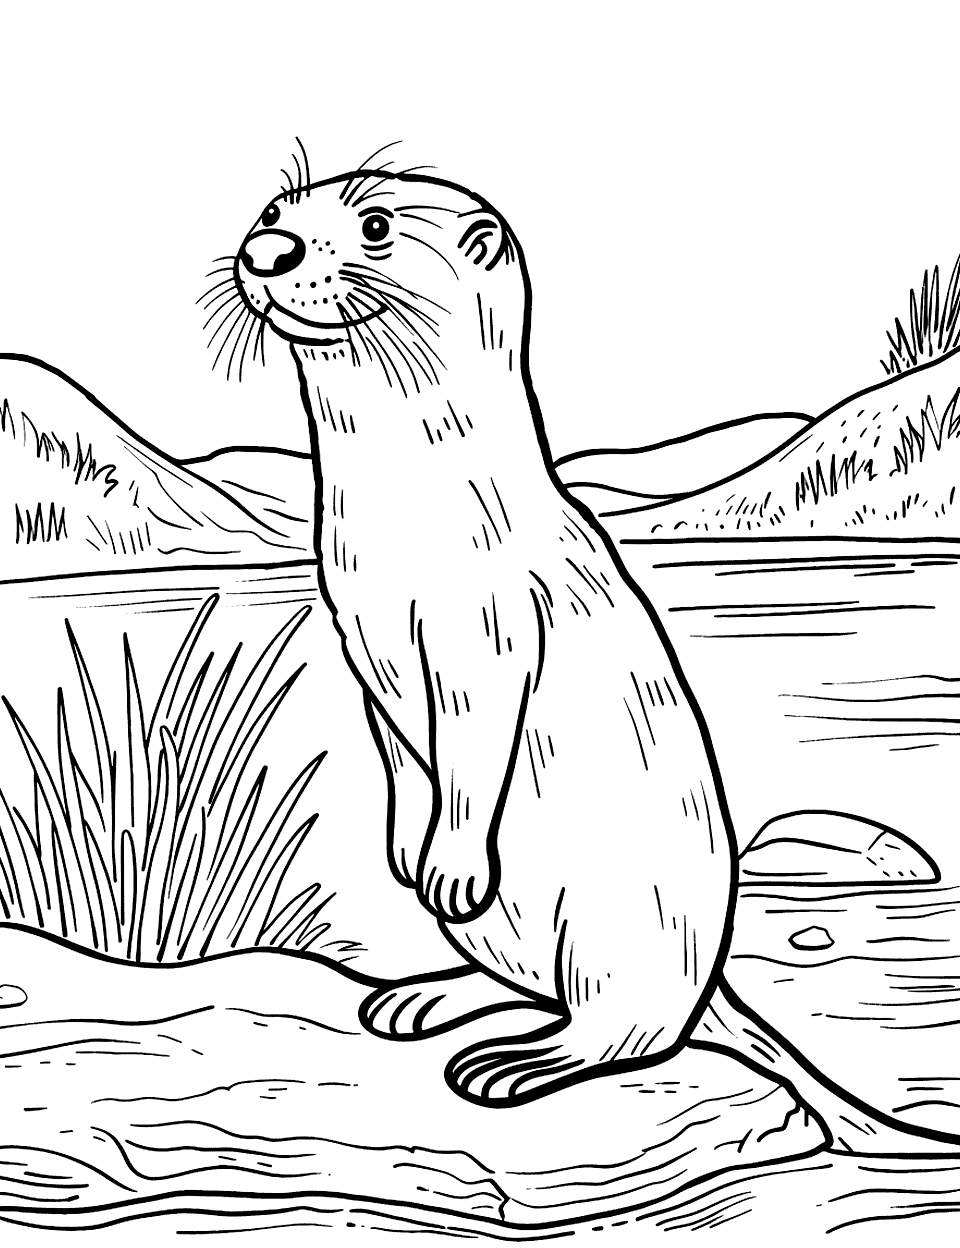 Otter at the River Bank Coloring Page - A river otter standing on the edge of a river.